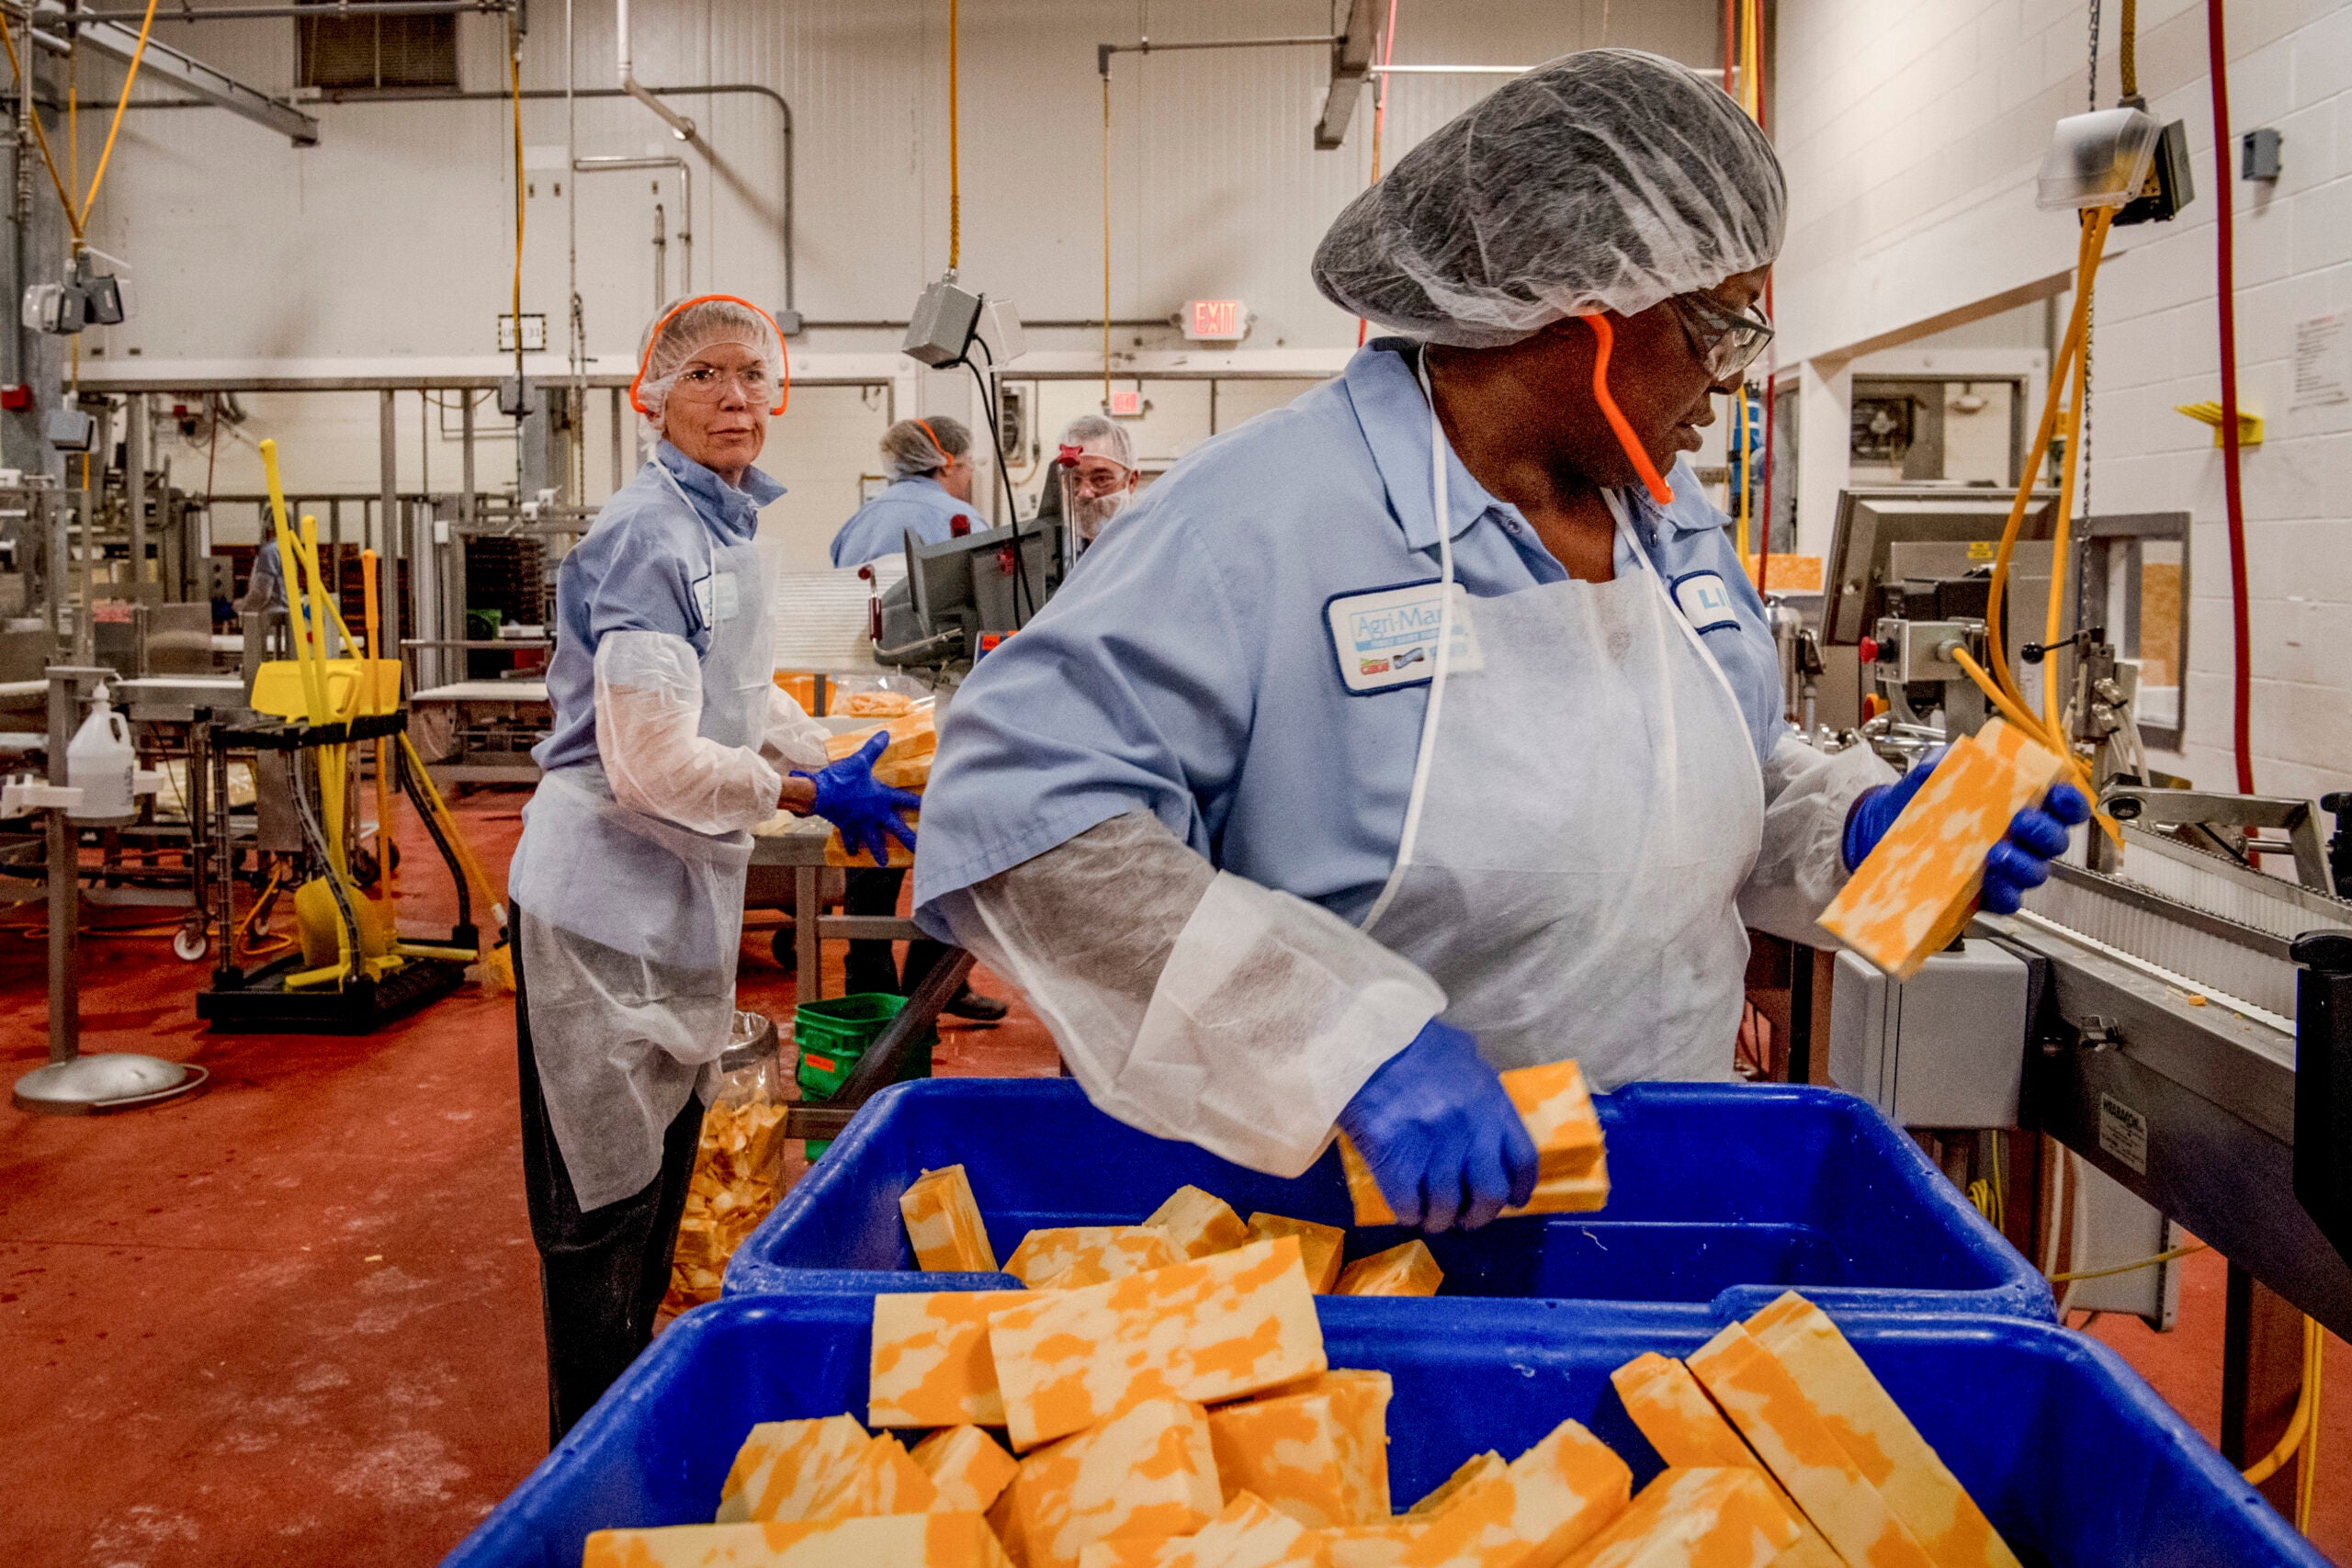 Workers at the Cabot Creamery facility in Cabot, Vt.